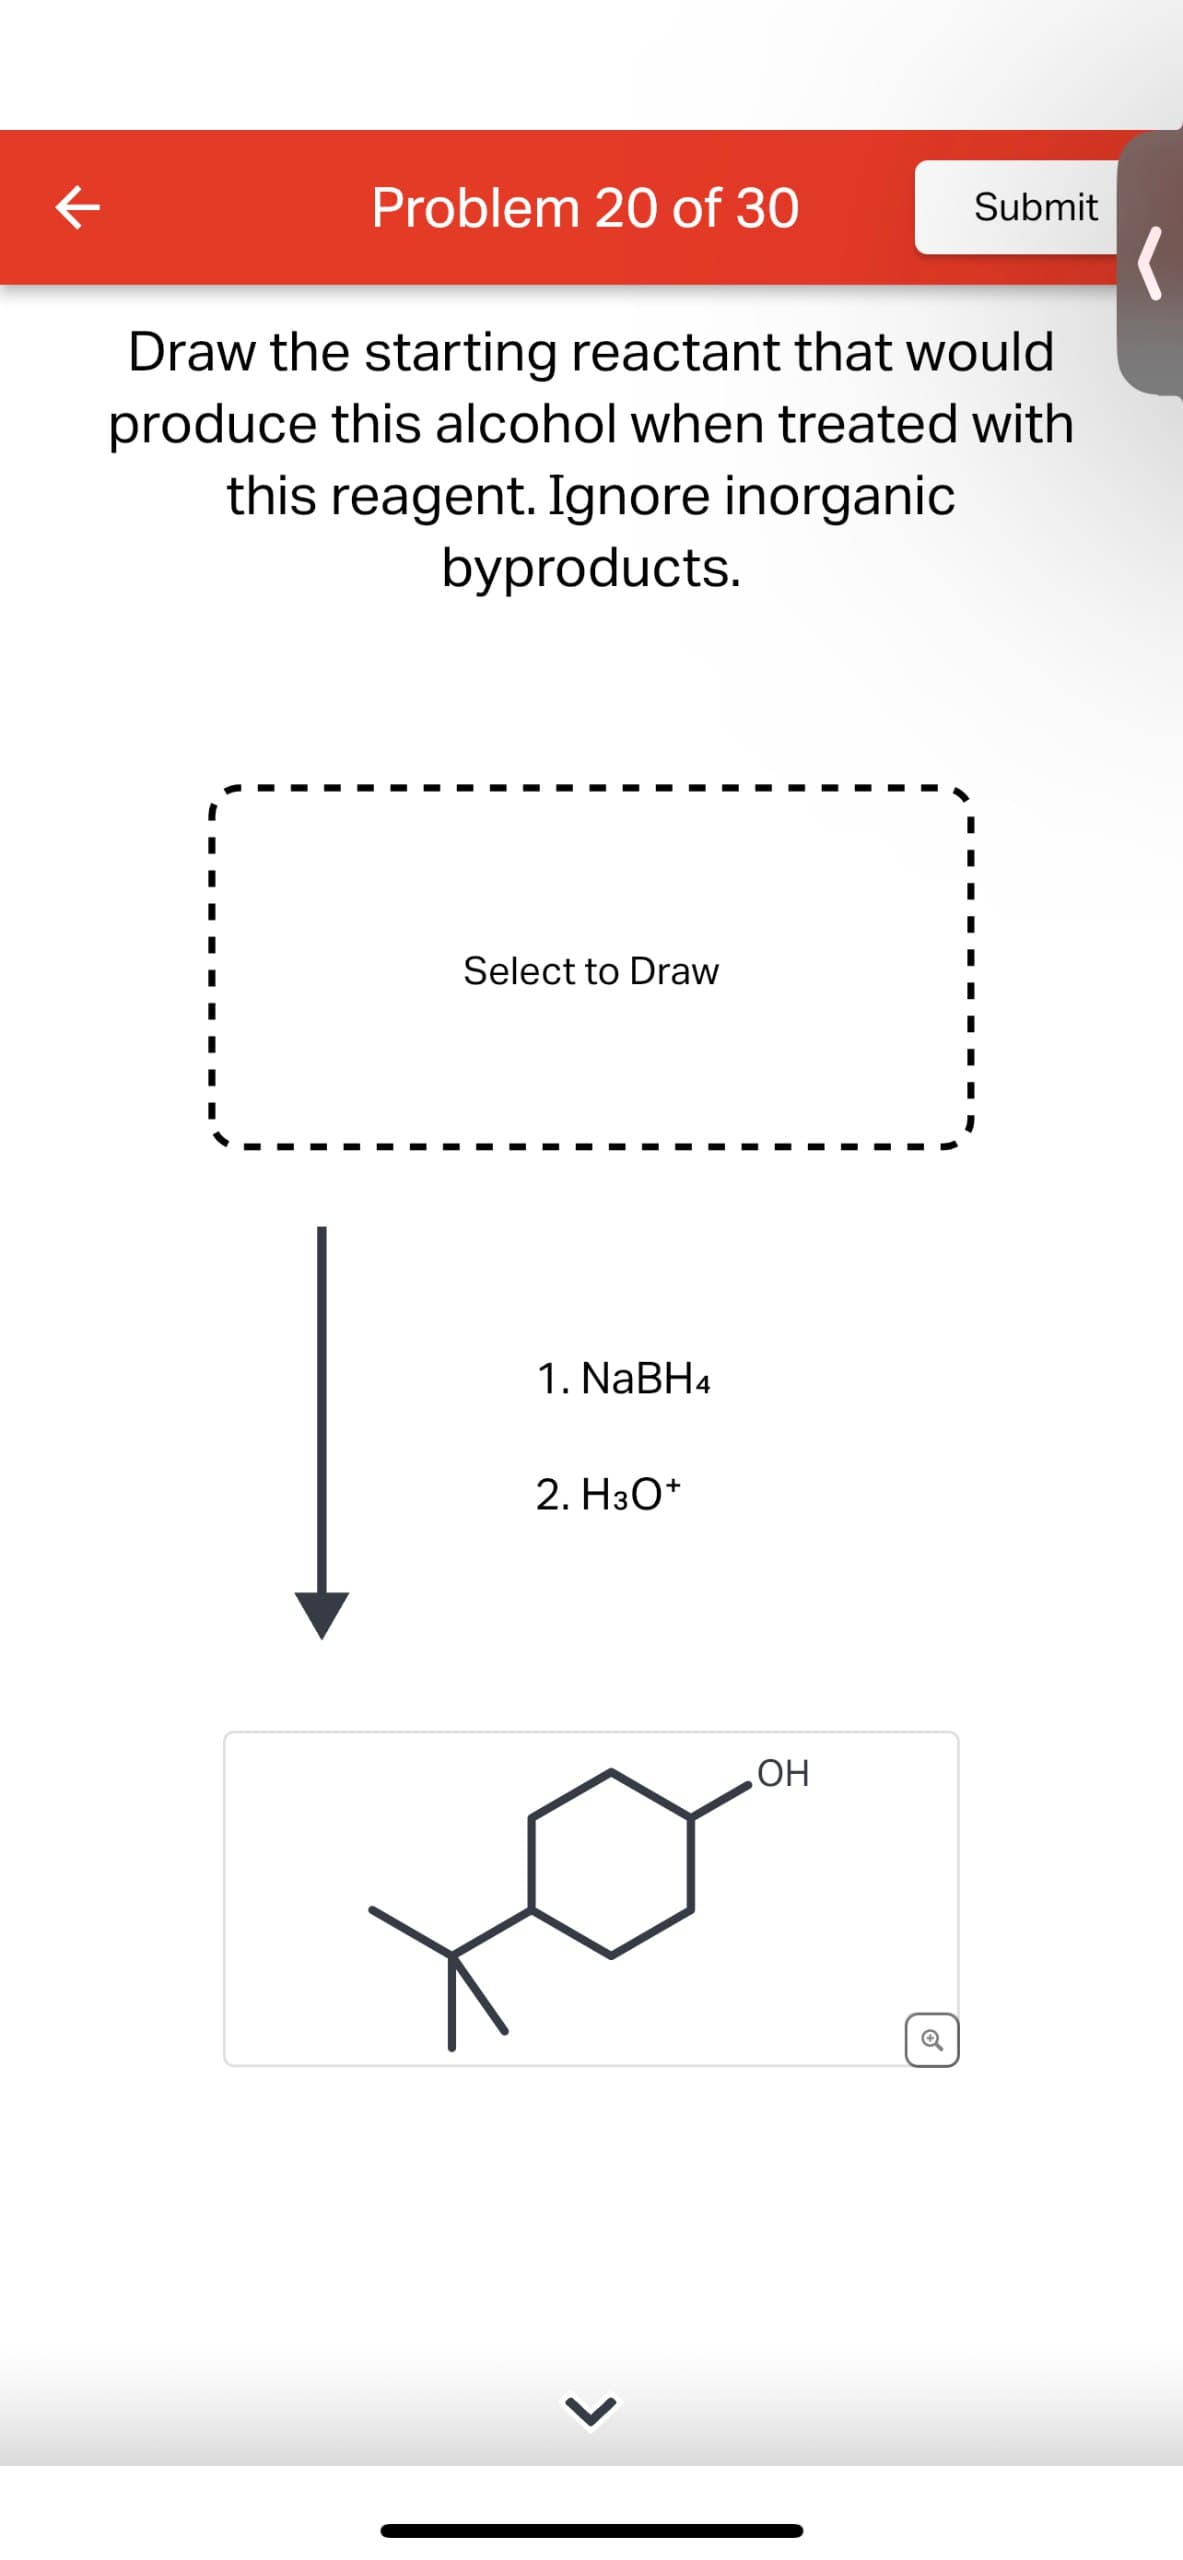 Problem 20 of 30
Submit
Draw the starting reactant that would
produce this alcohol when treated with
this reagent. Ignore inorganic
byproducts.
Select to Draw
1. NaBH4
2. H3O+
OH
O